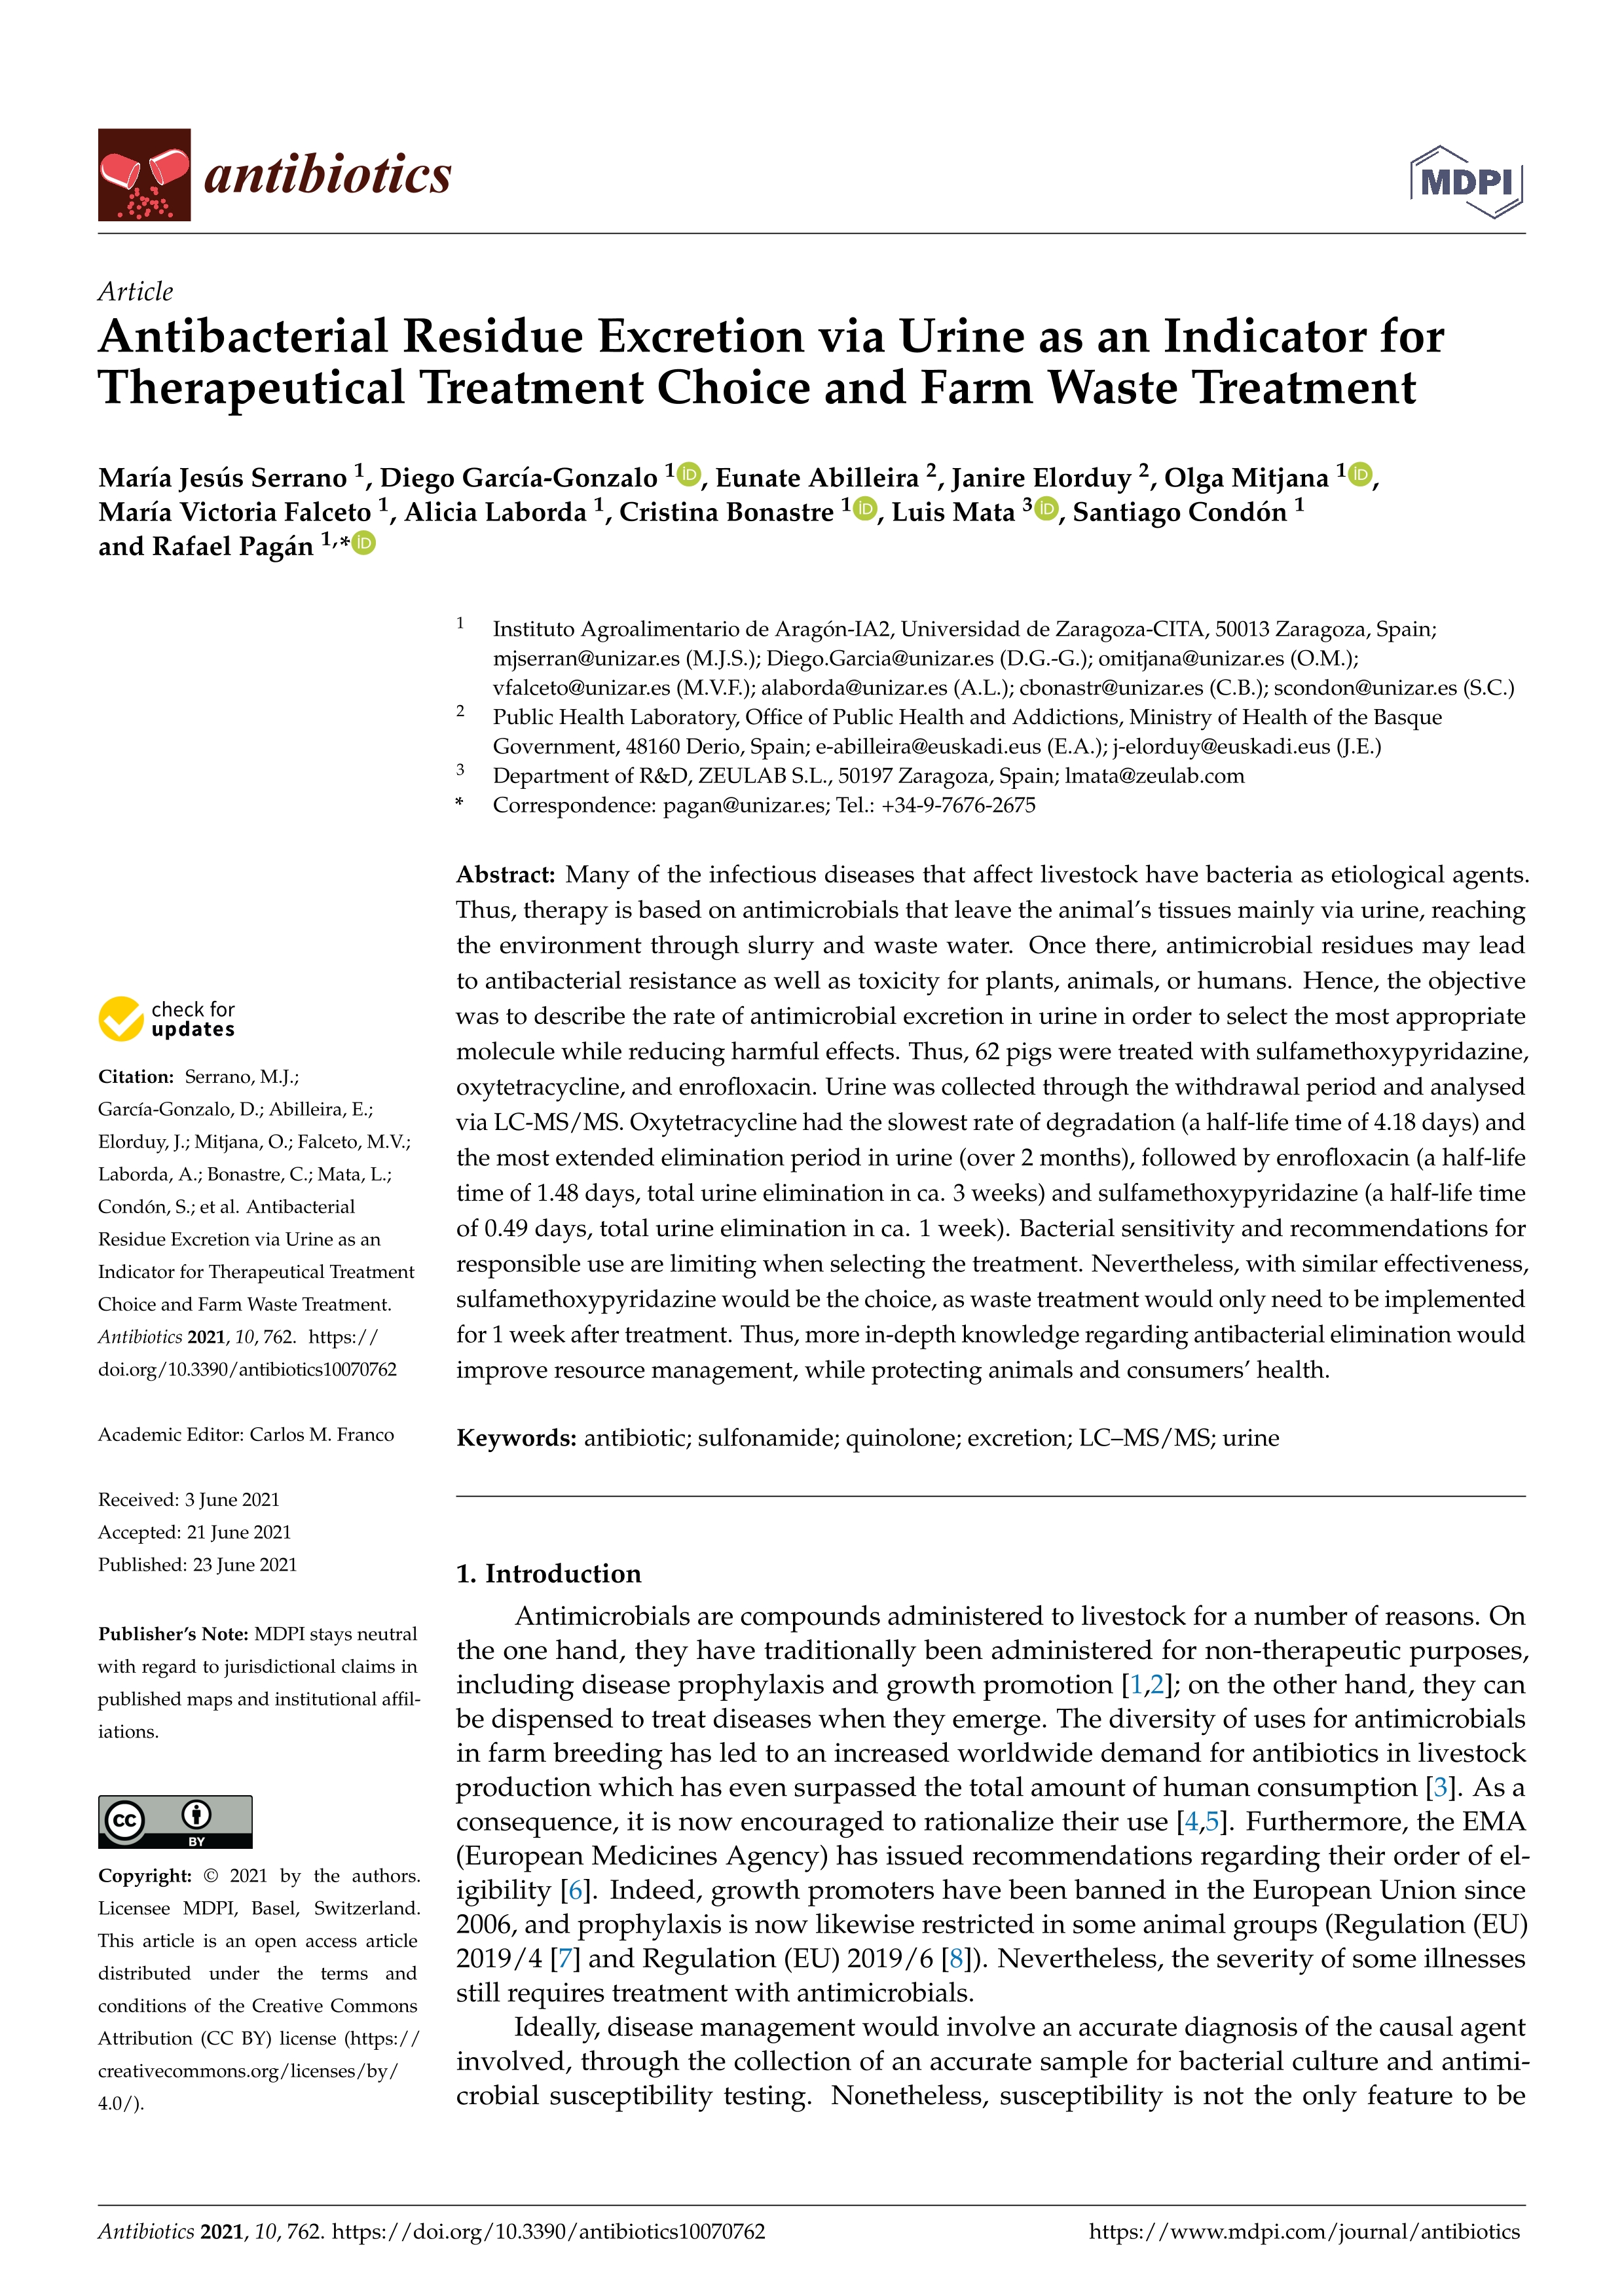 Antibacterial residue excretion via urine as an indicator for therapeutical treatment choice and farm waste treatment